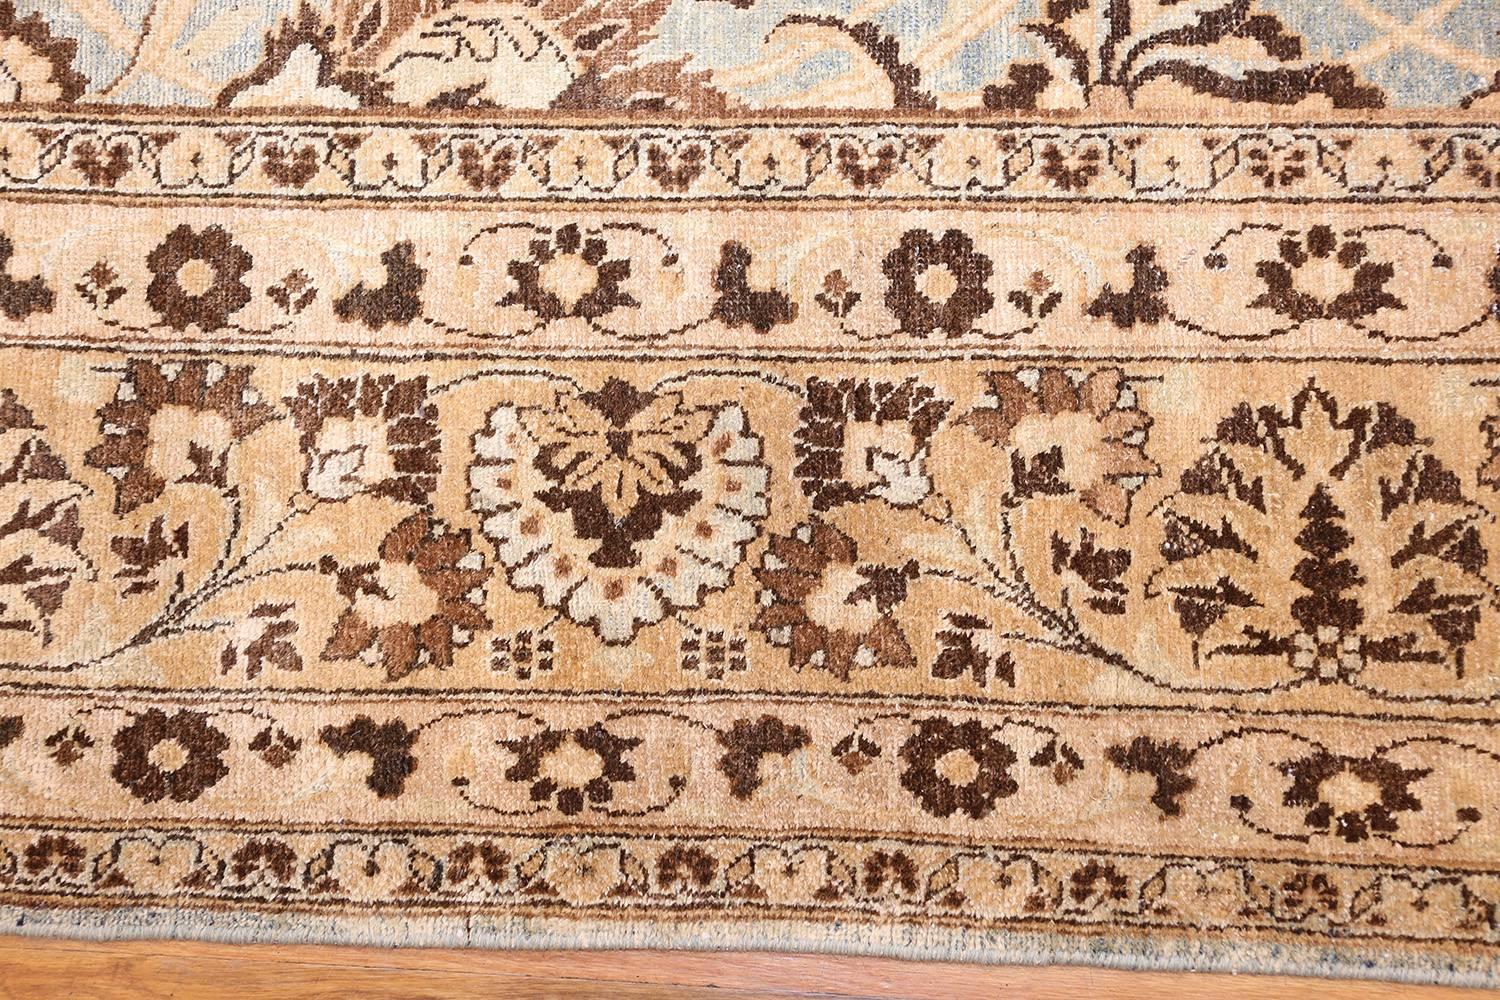 Nazmiyal Collection Antique Persian Khorassan Rug. Size: 11 ft 9 in x 15 ft 1